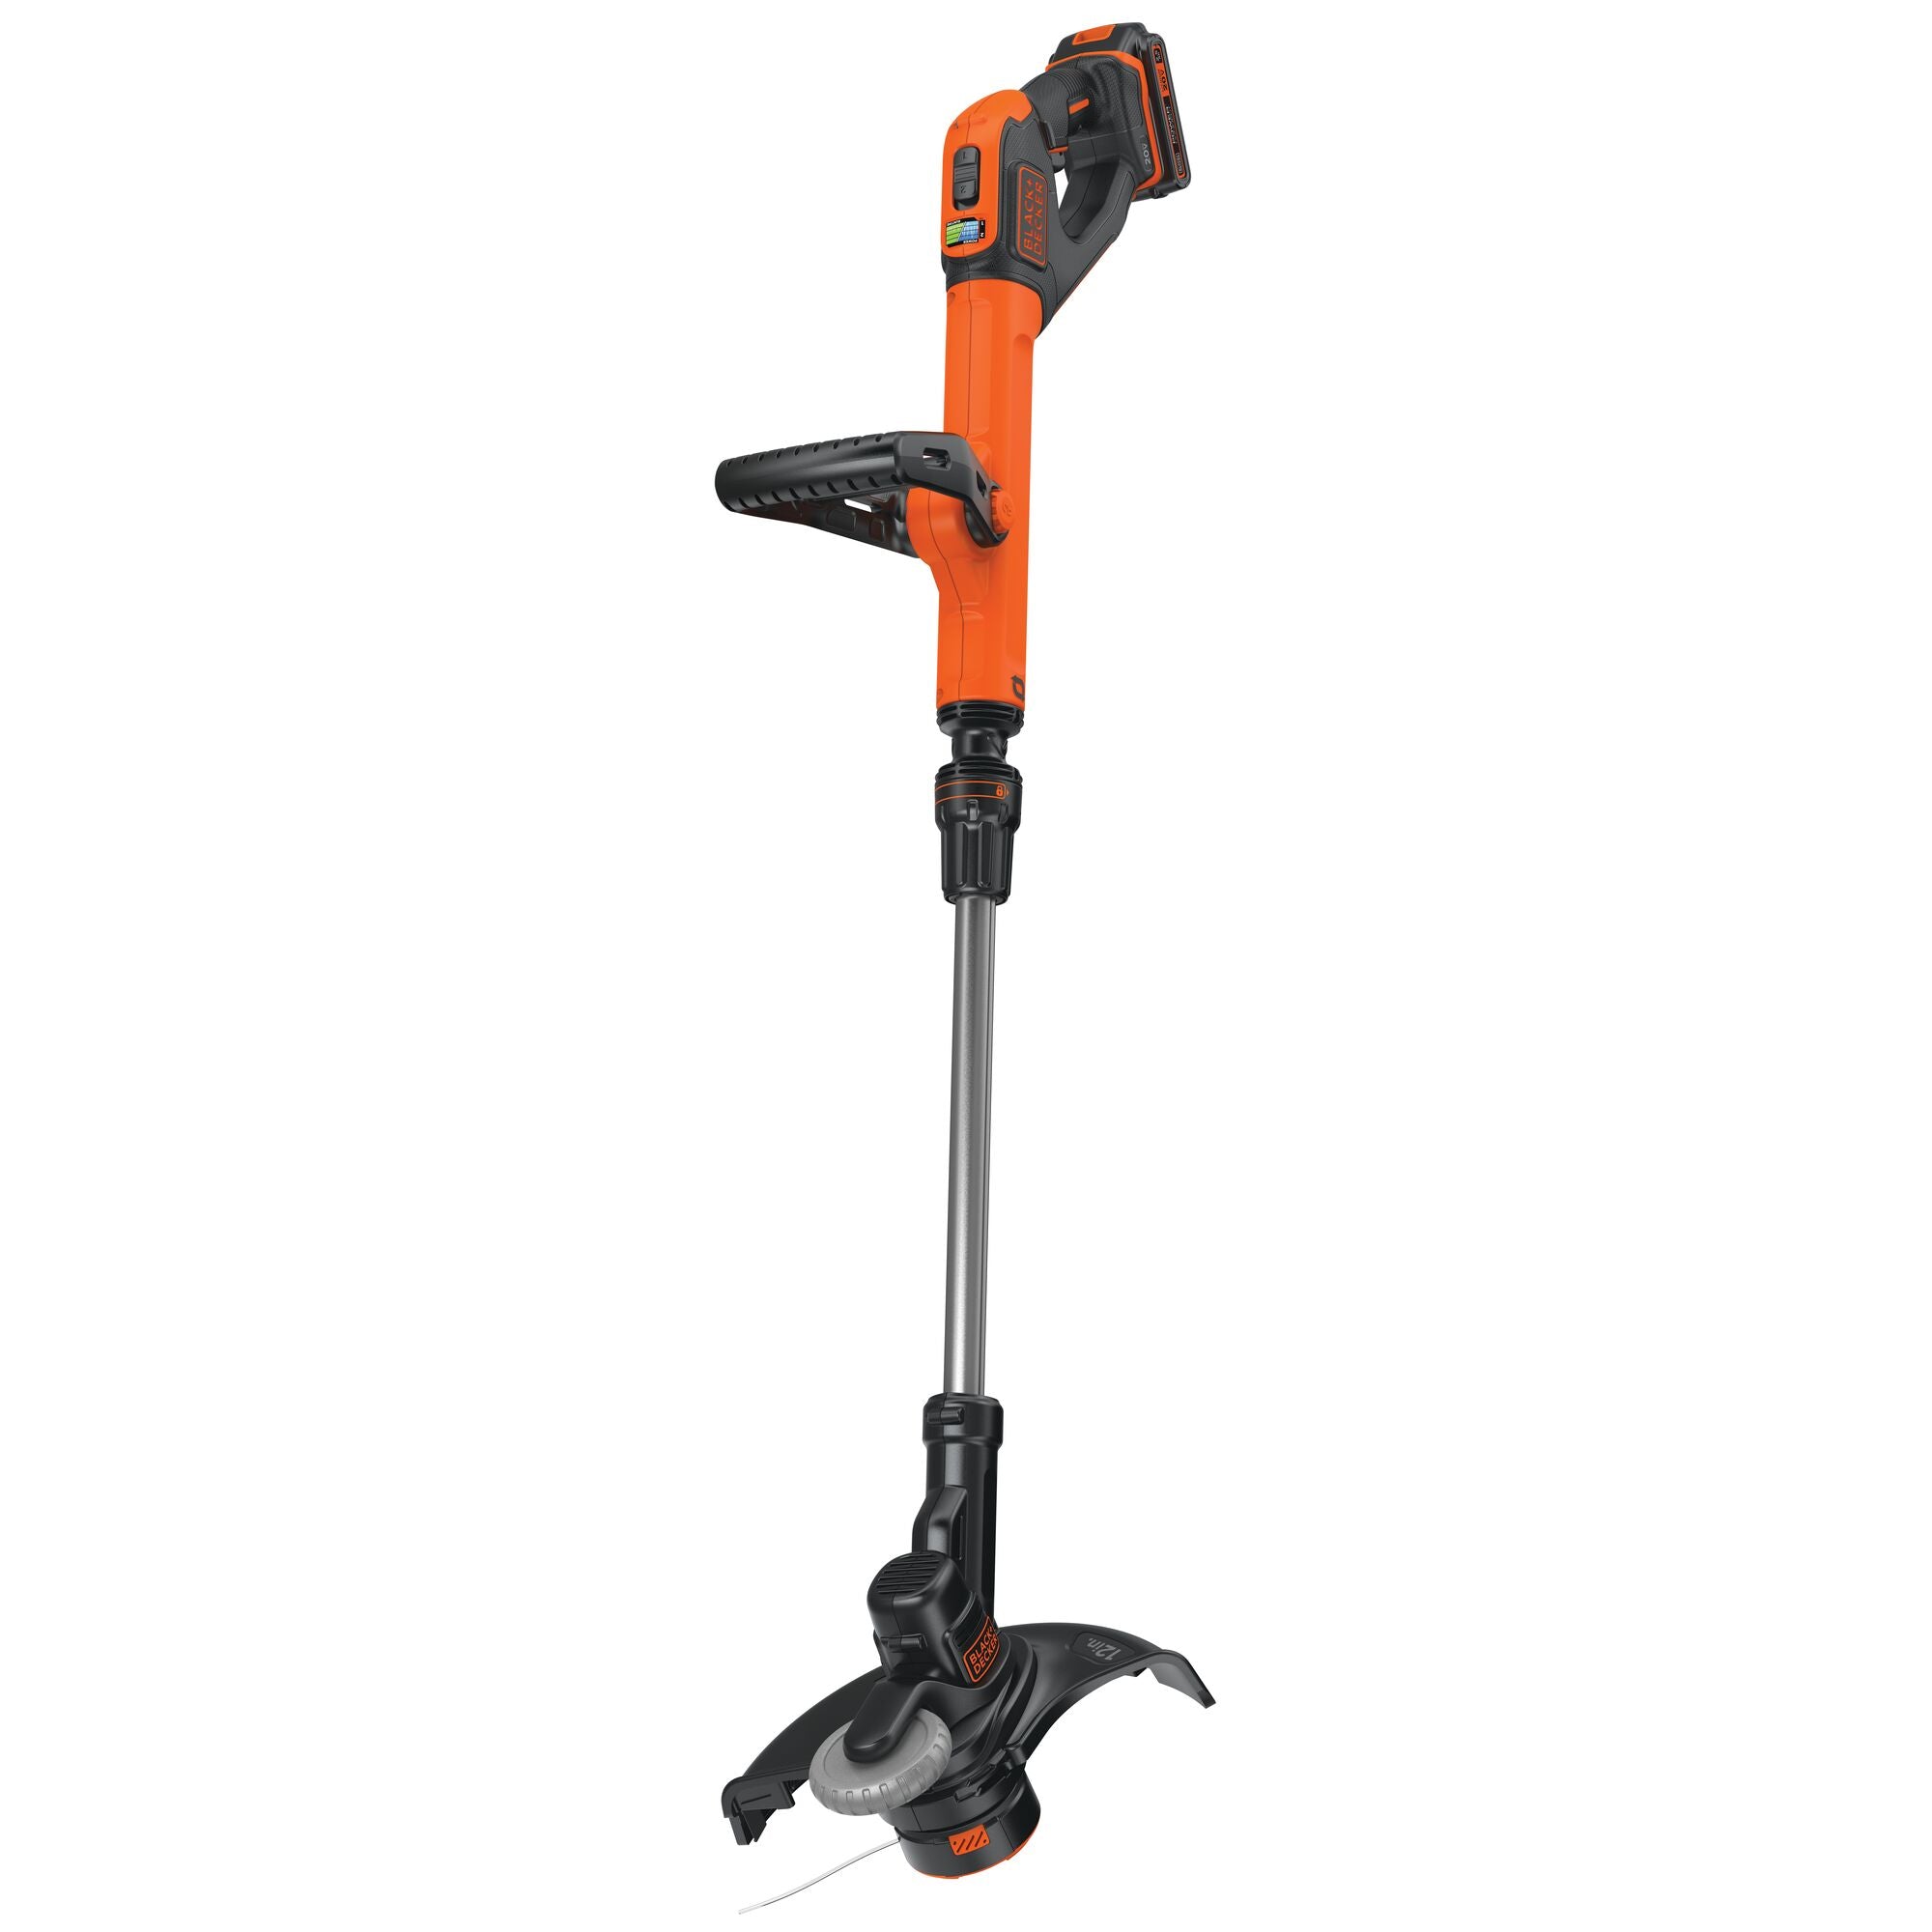 Profile of 20 volt MAX Lithium 12 inch 2 Speed String Trimmer / Edger.